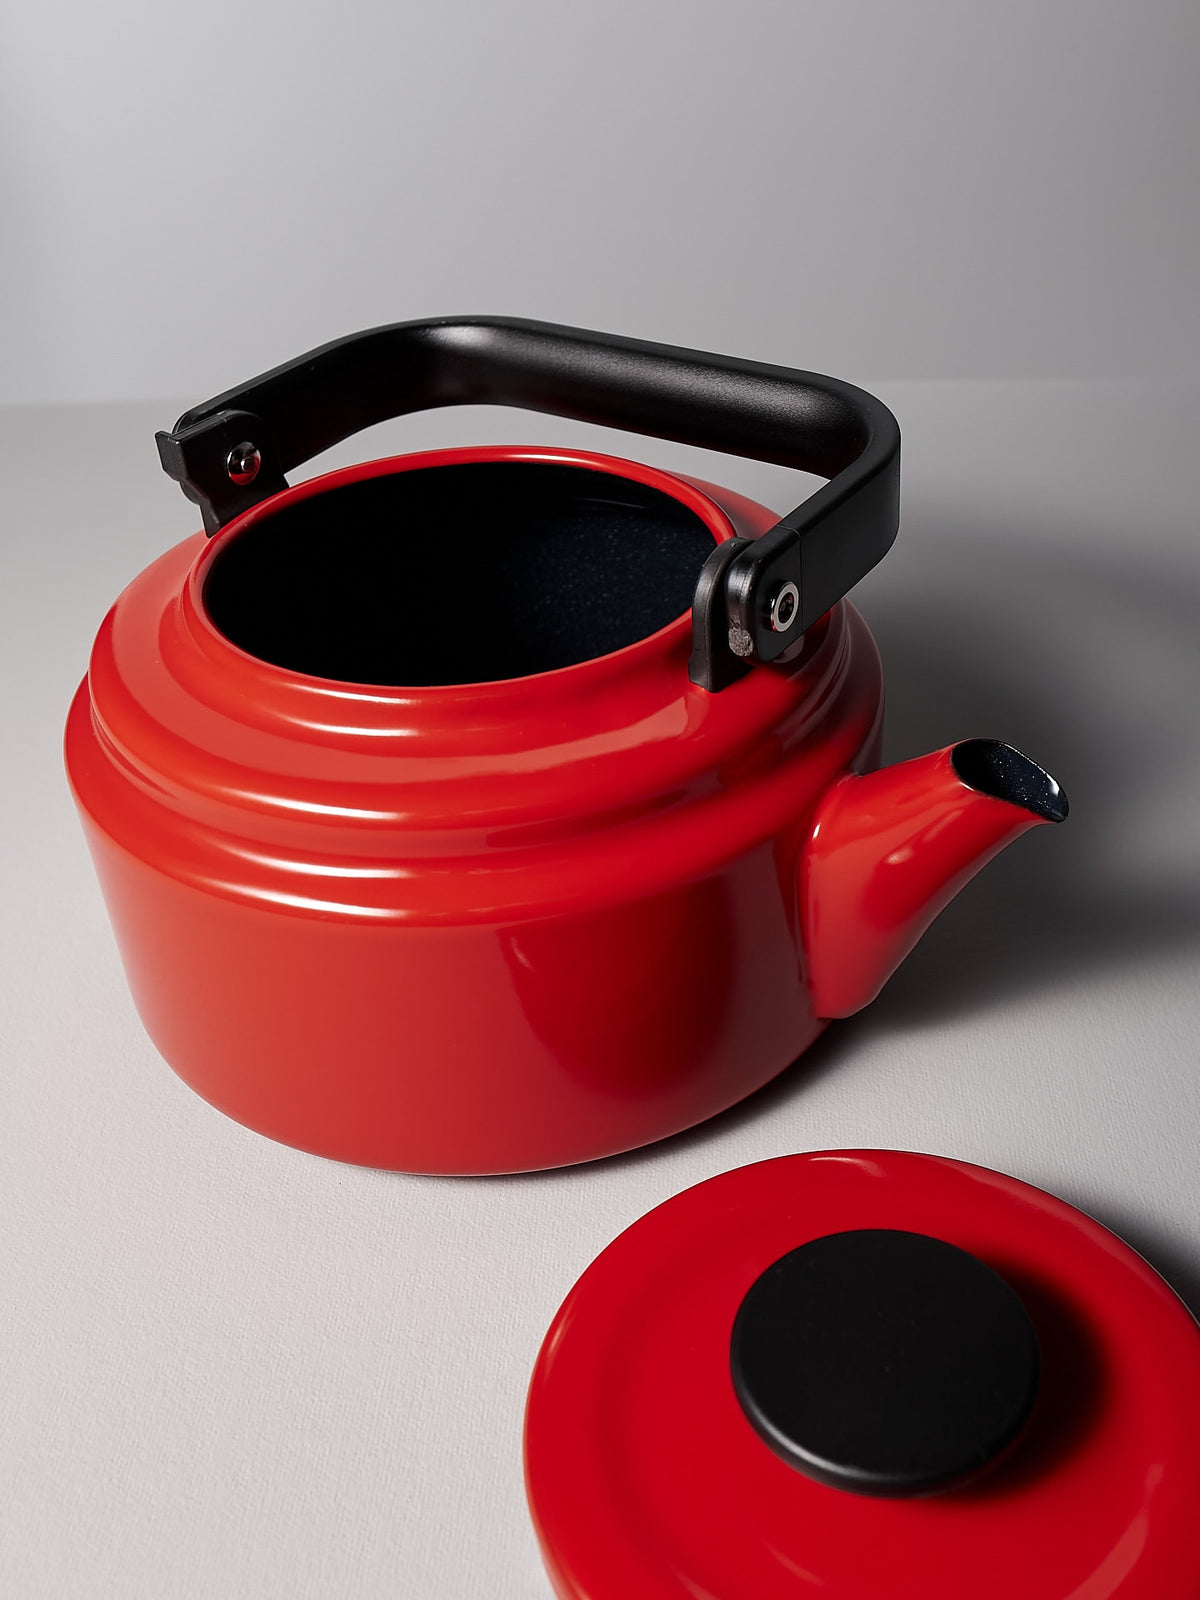 A Noda Horo Amu Stove-top Kettle - Red with a black handle.